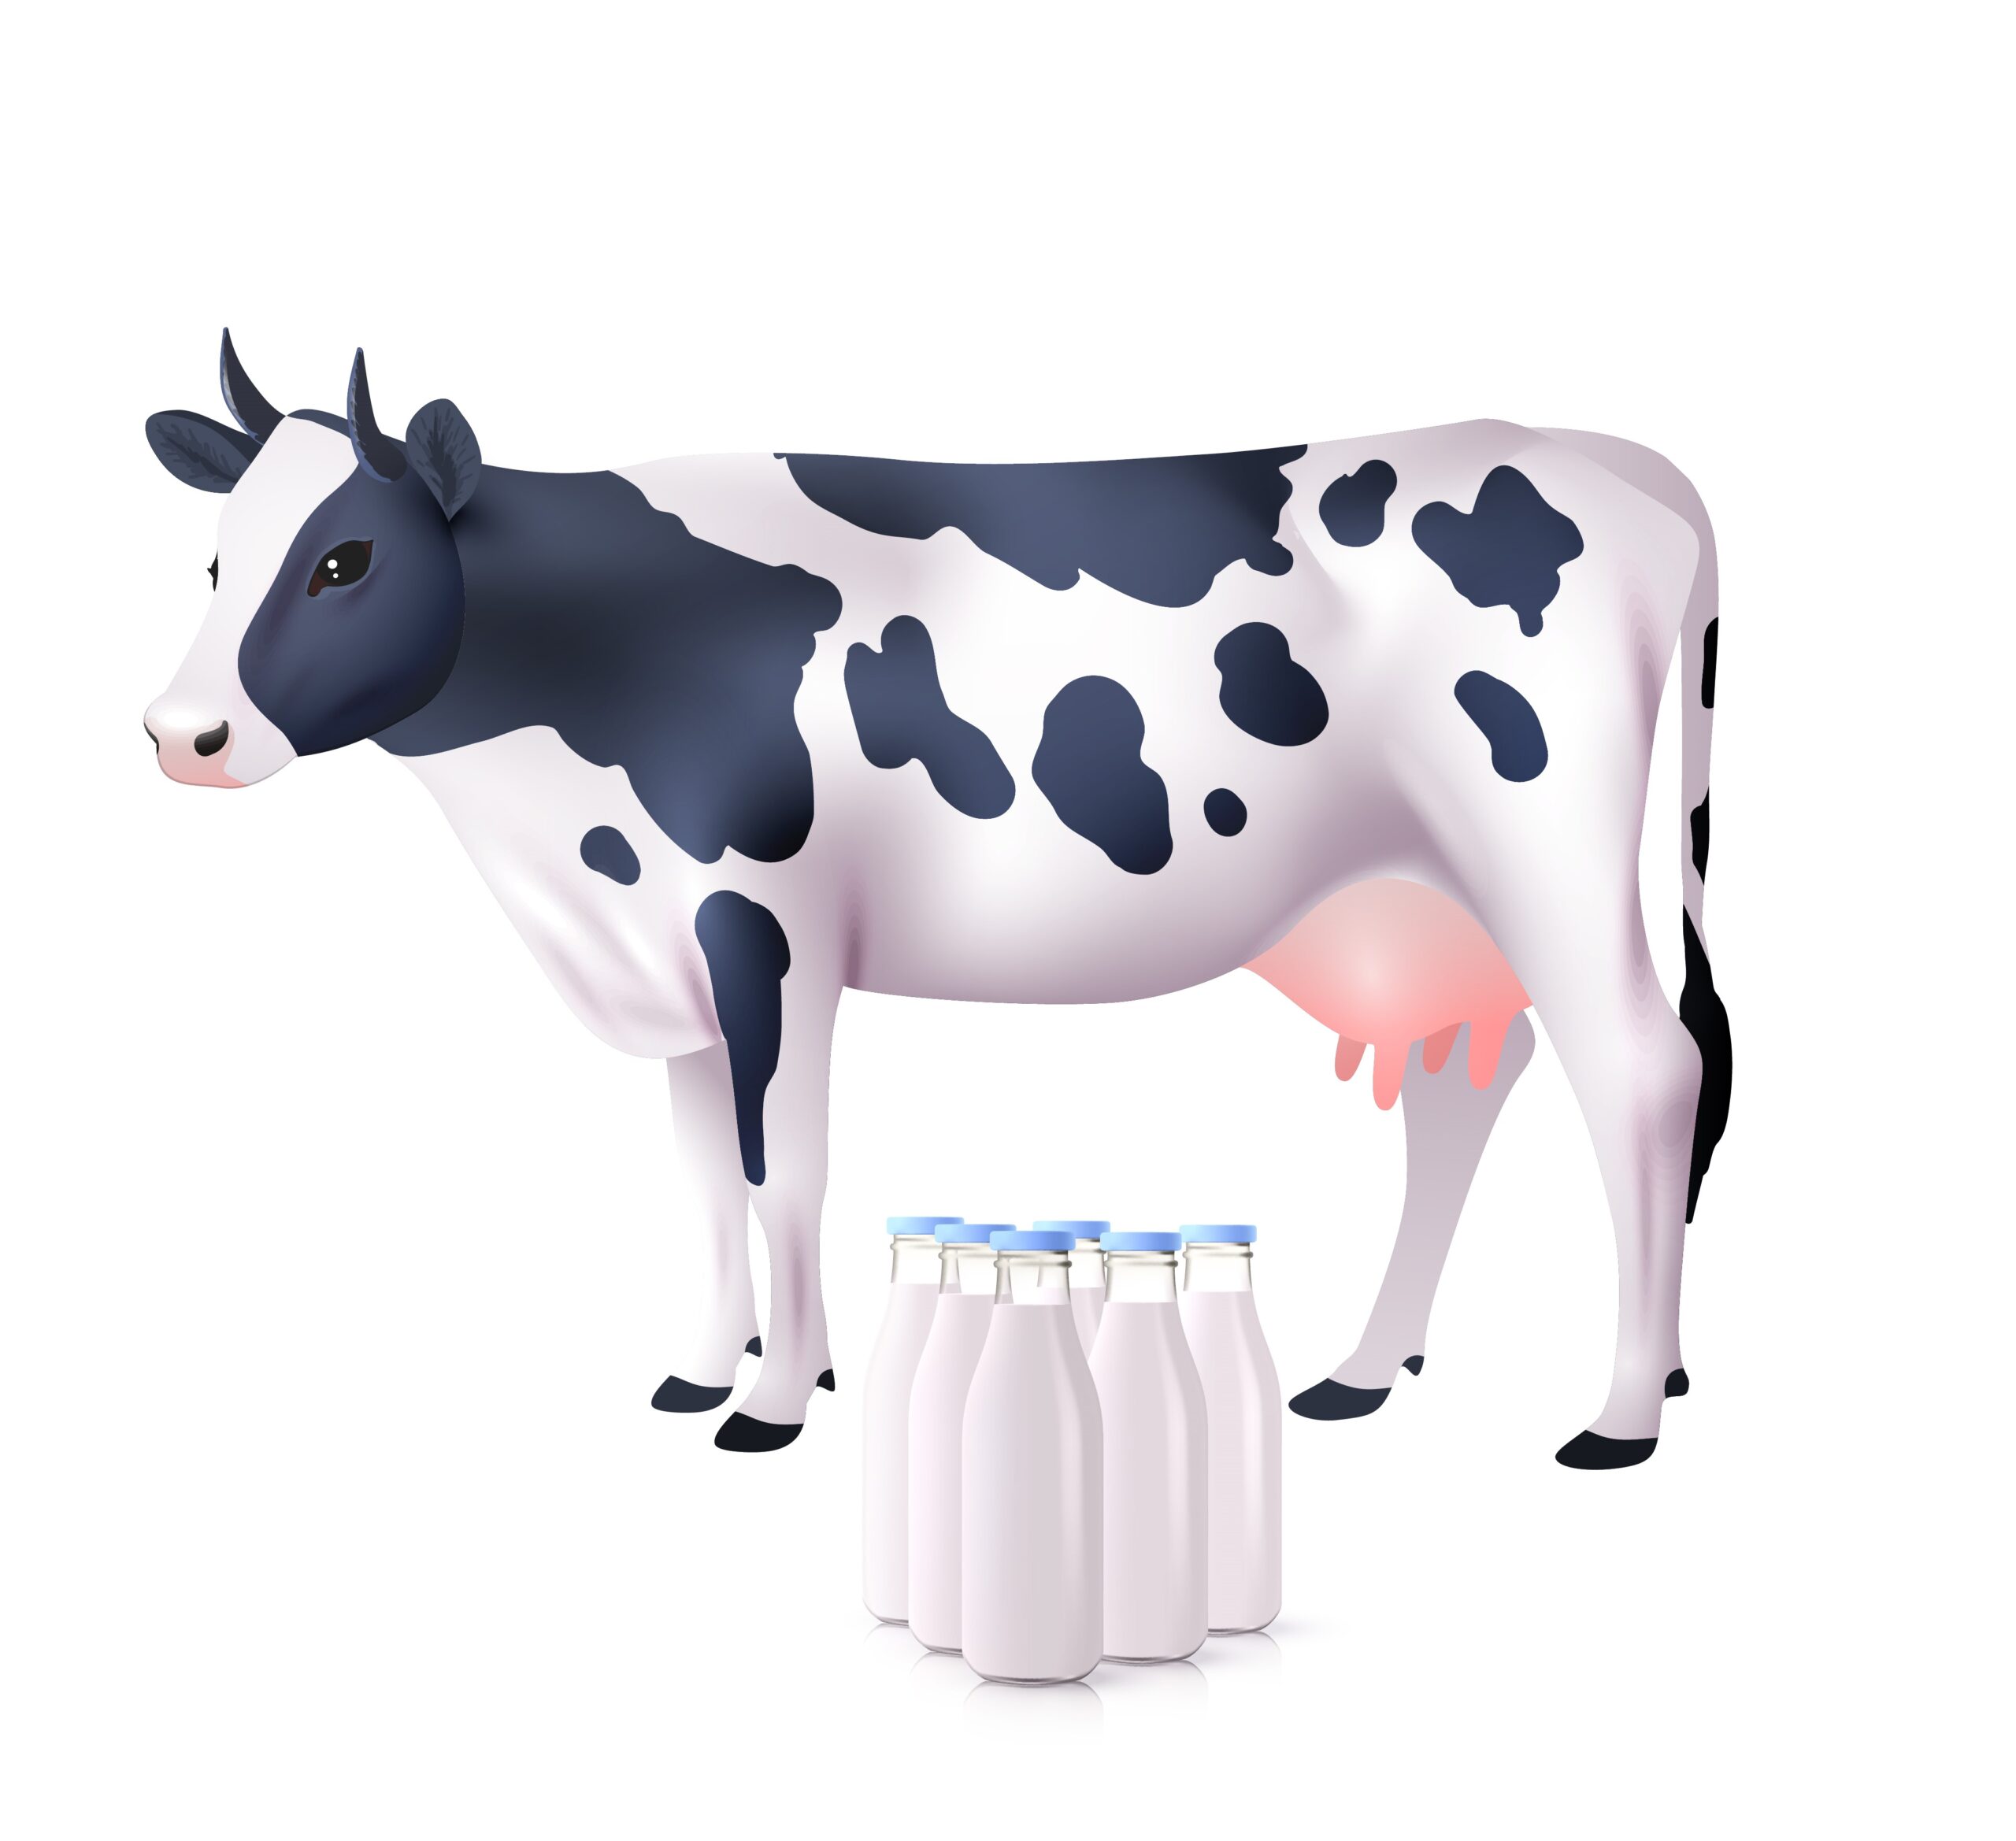 Practice Problem: Why Buy the Cow?